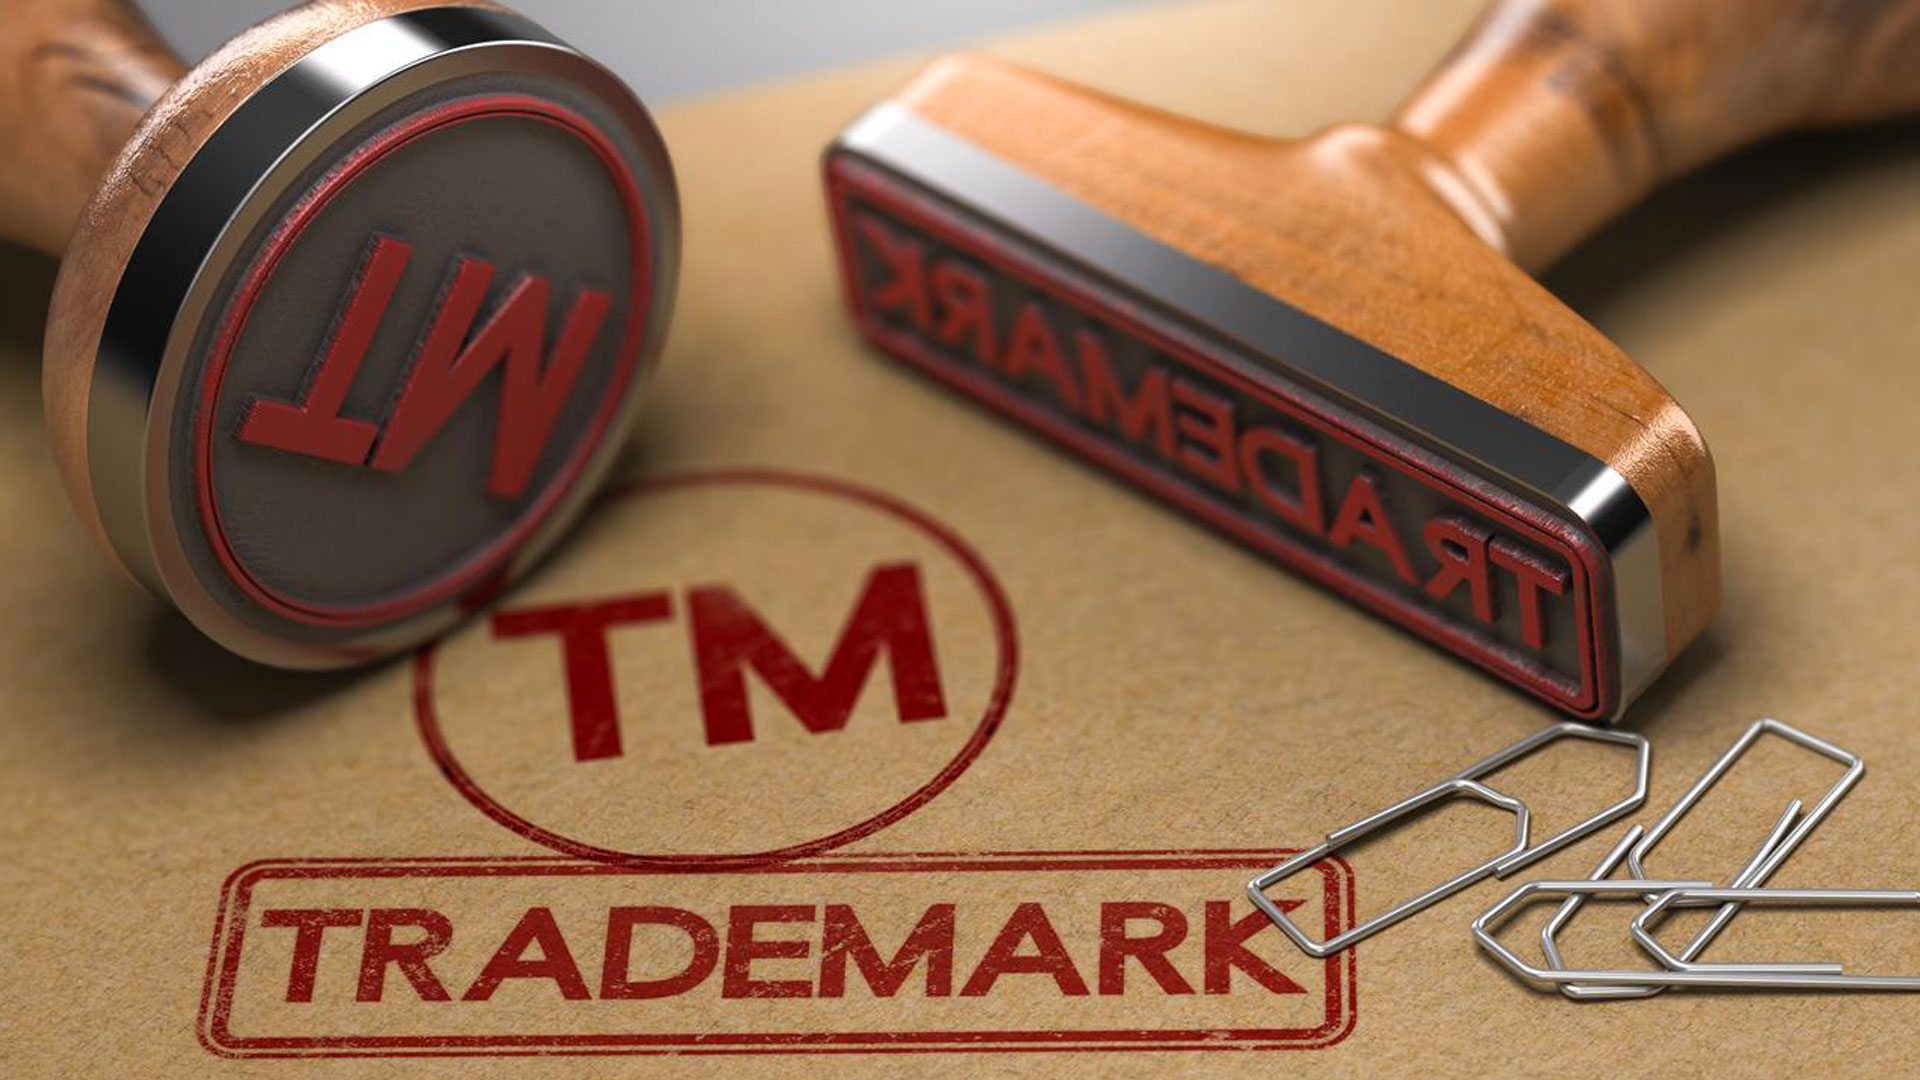 Trademark Registration in Nigeria TRADEMARK REGISTRATION IN NIGERIA Lex Artifex LLP, a top trademark law firm in Nigeria has introduced the IPR Helpdesk to assist Nigerian and international businesses in protecting their trademarks in Nigeria. Lex Artifex LLP provides a “one-stop shop” for clients requiring legal services at every stage of the brand lifecycle. We assist our clients with the registration of new marks, filing and prosecuting of marks, and the commercializing and enforcement of their brands. We act for all brand owners across a wide range of sectors and we represent many clients worldwide. For trademark registration in Nigeria, our services cover: FILING OF TRADEMARK APPLICATION IN NIGERIA Many international brands and transnational companies file trademarks in Nigeria as their overseas market of interest. Our team assists with the required due diligence and provide the client with a filing strategy that is both cost-effective and which satisfies the client’s business needs. We also assist our clients with selecting their trademarks at the very start of the brand lifecycle. We understand the commercial importance of selecting distinctive trademarks that are both suitable for brand building and which clients can claim an exclusive right of use in other jurisdictions. CONDUCTING TRADEMARK SEARCH IN NIGERIA Before launching a new product or service under a particular trademark, it is advisable to conduct a trademark search in Nigeria, confirming that you are free to use the mark without infringing another’s rights and that you will be able to establish exclusive rights to the use of your chosen mark. TRADEMARK REGISTRATION IN NIGERIA Although a trader may acquire rights in a trademark through actual use in the marketplace, trademark registration in Nigeria gives its owner a statutory right against infringement and counterfeiting. Registration will also facilitate commercial dealings like asset transfers and licensing. We can prepare and file trademark applications for you in Nigeria and obtain the certificate of trademark registration. A Nigerian trademark may be a device, brand, label, ticket, name, signature, word, letter, numeral, or any combination thereof that is legally registered with the Trademarks, Patents and Designs Registry, Commercial Law Department, Federal Ministry of Industry, Trade and Investment, as representing a company or product and distinguishing the source of goods from one party or company to those of others in the same line of business. The Lex Artifex LLP team consists of specialist trademark attorneys licensed by the Nigerian IP Office. The attorneys provide a full range of trademark services including trademark opposition in Nigeria; trademark renewal in Nigeria, and brand and anti-counterfeiting services. CONTACT: For business-focused IPR advice, contact us today, email at lexartifexllp@lexartifexllp.com, call or WhatsApp +234 803 979 5959. 